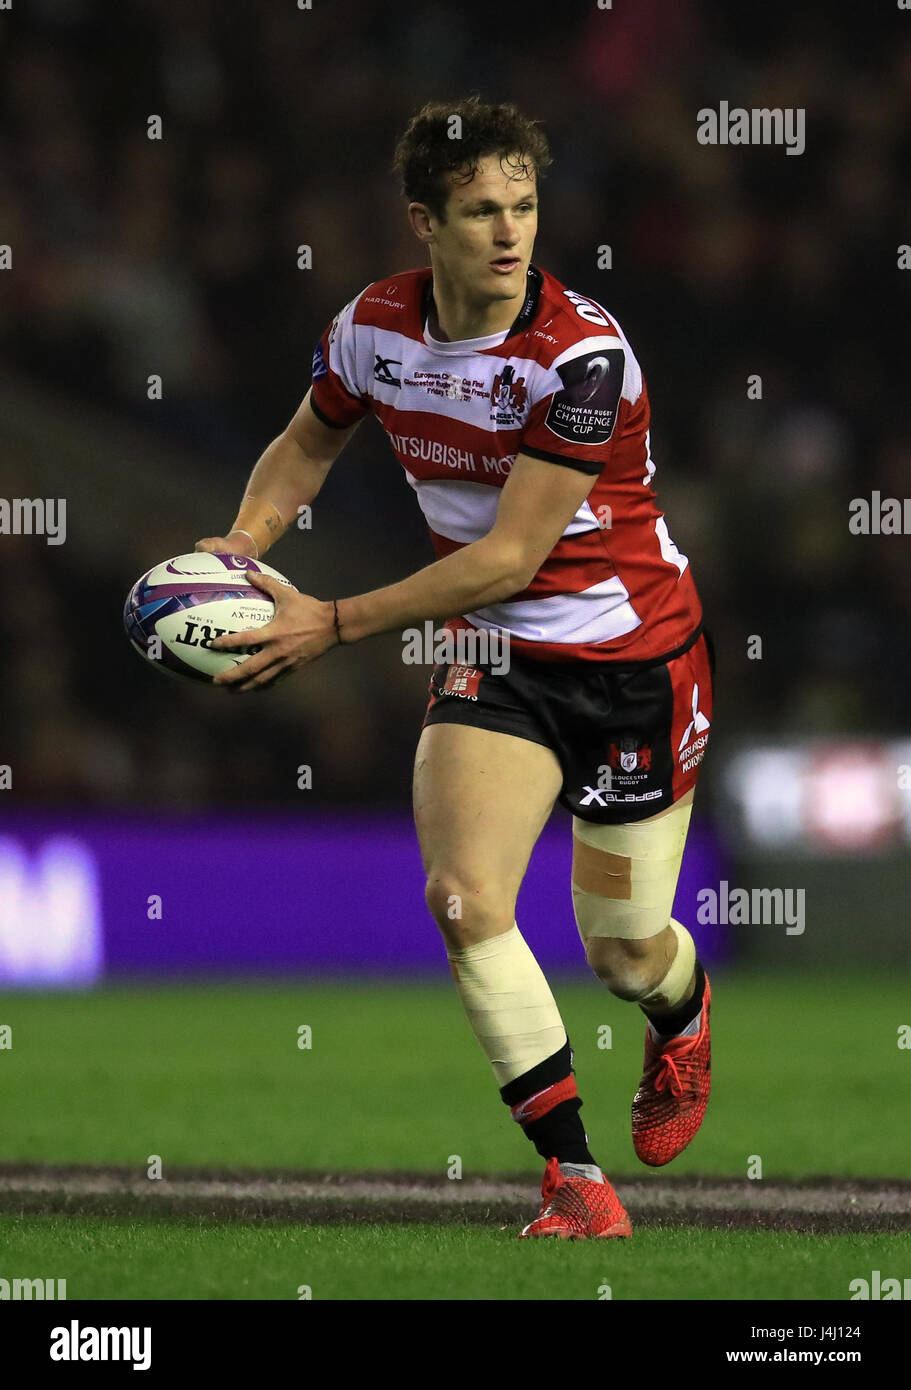 Gloucester Rugby's Billy Burns during the European Challenge Cup Final at BT Murrayfield, Edinburgh. PRESS ASSOCIATION Photo. Picture date: Friday May 12, 2017. See PA story RUGBYU Final. Photo credit should read: Mike Egerton/PA Wire Stock Photo